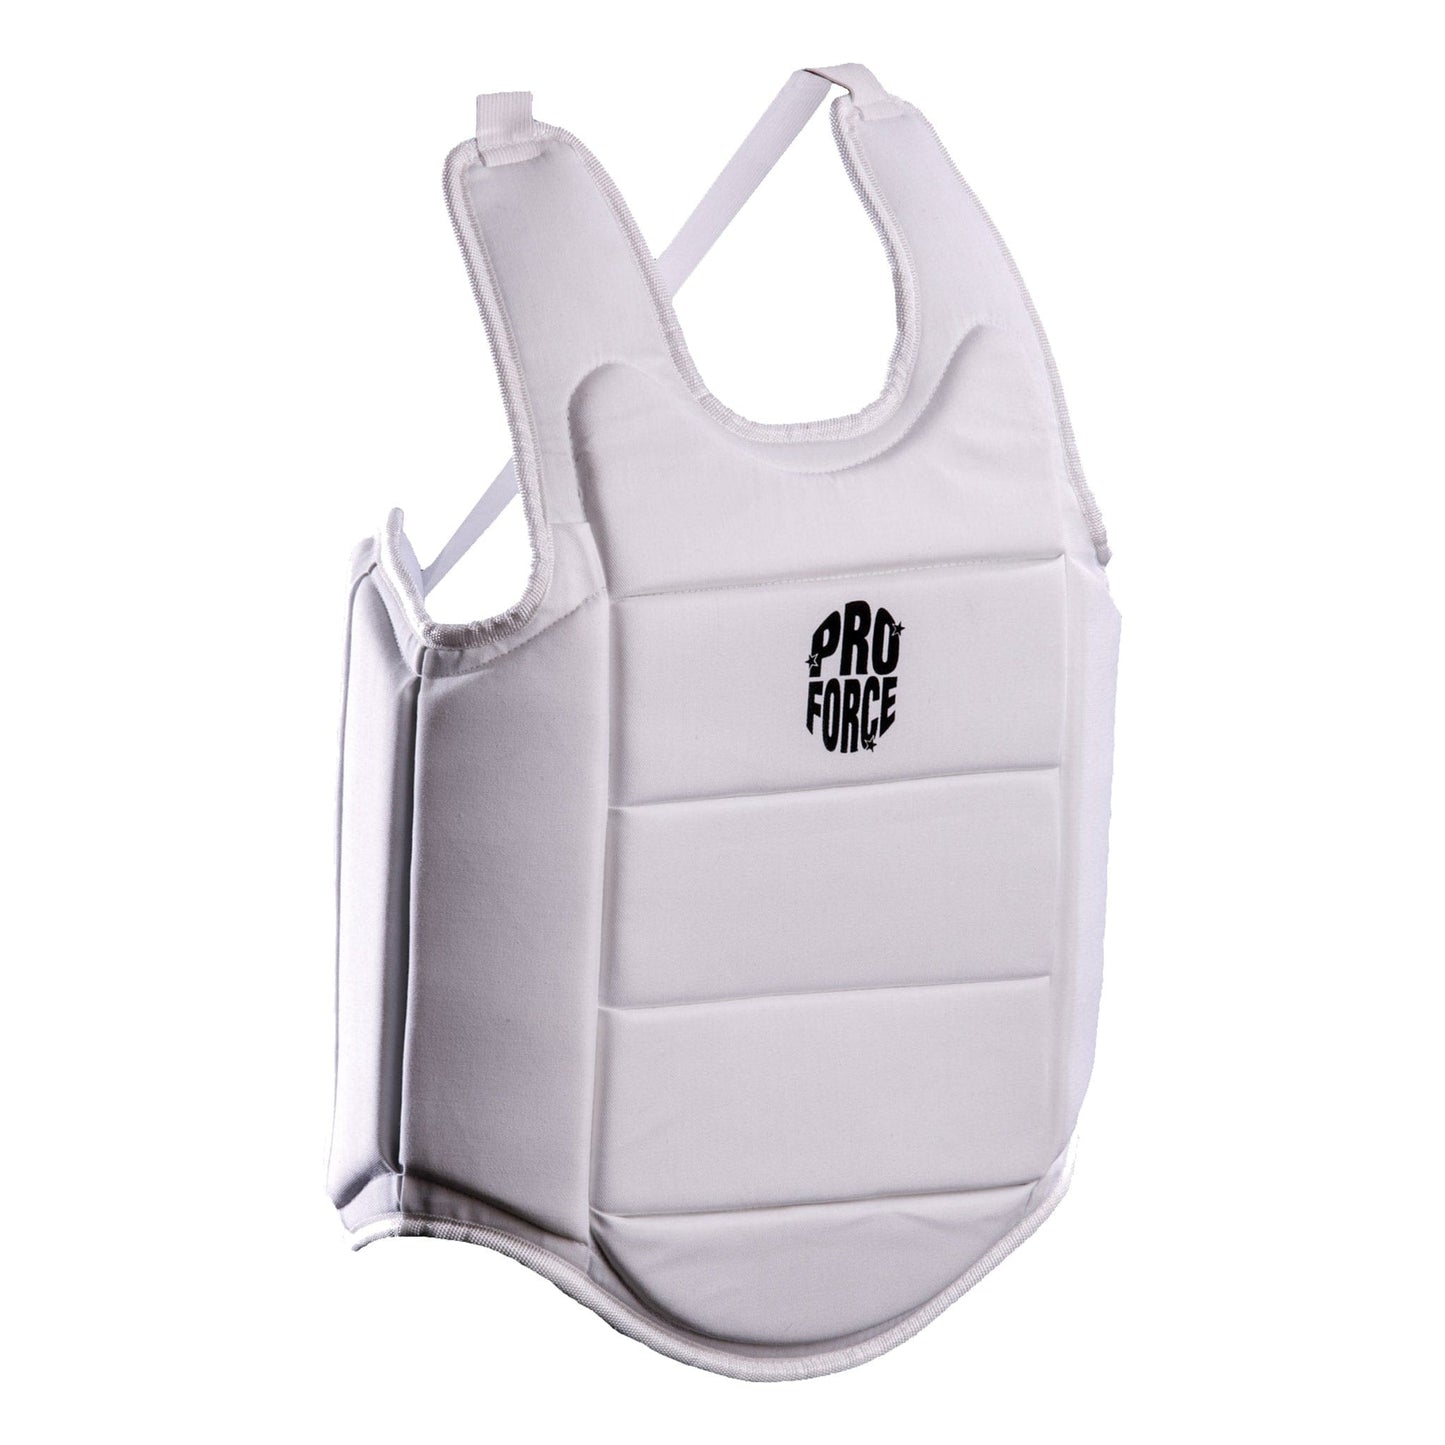 ProForce sporting goods xx-small ProForce Ultra Lite Chest Guard White Karate Martial Arts